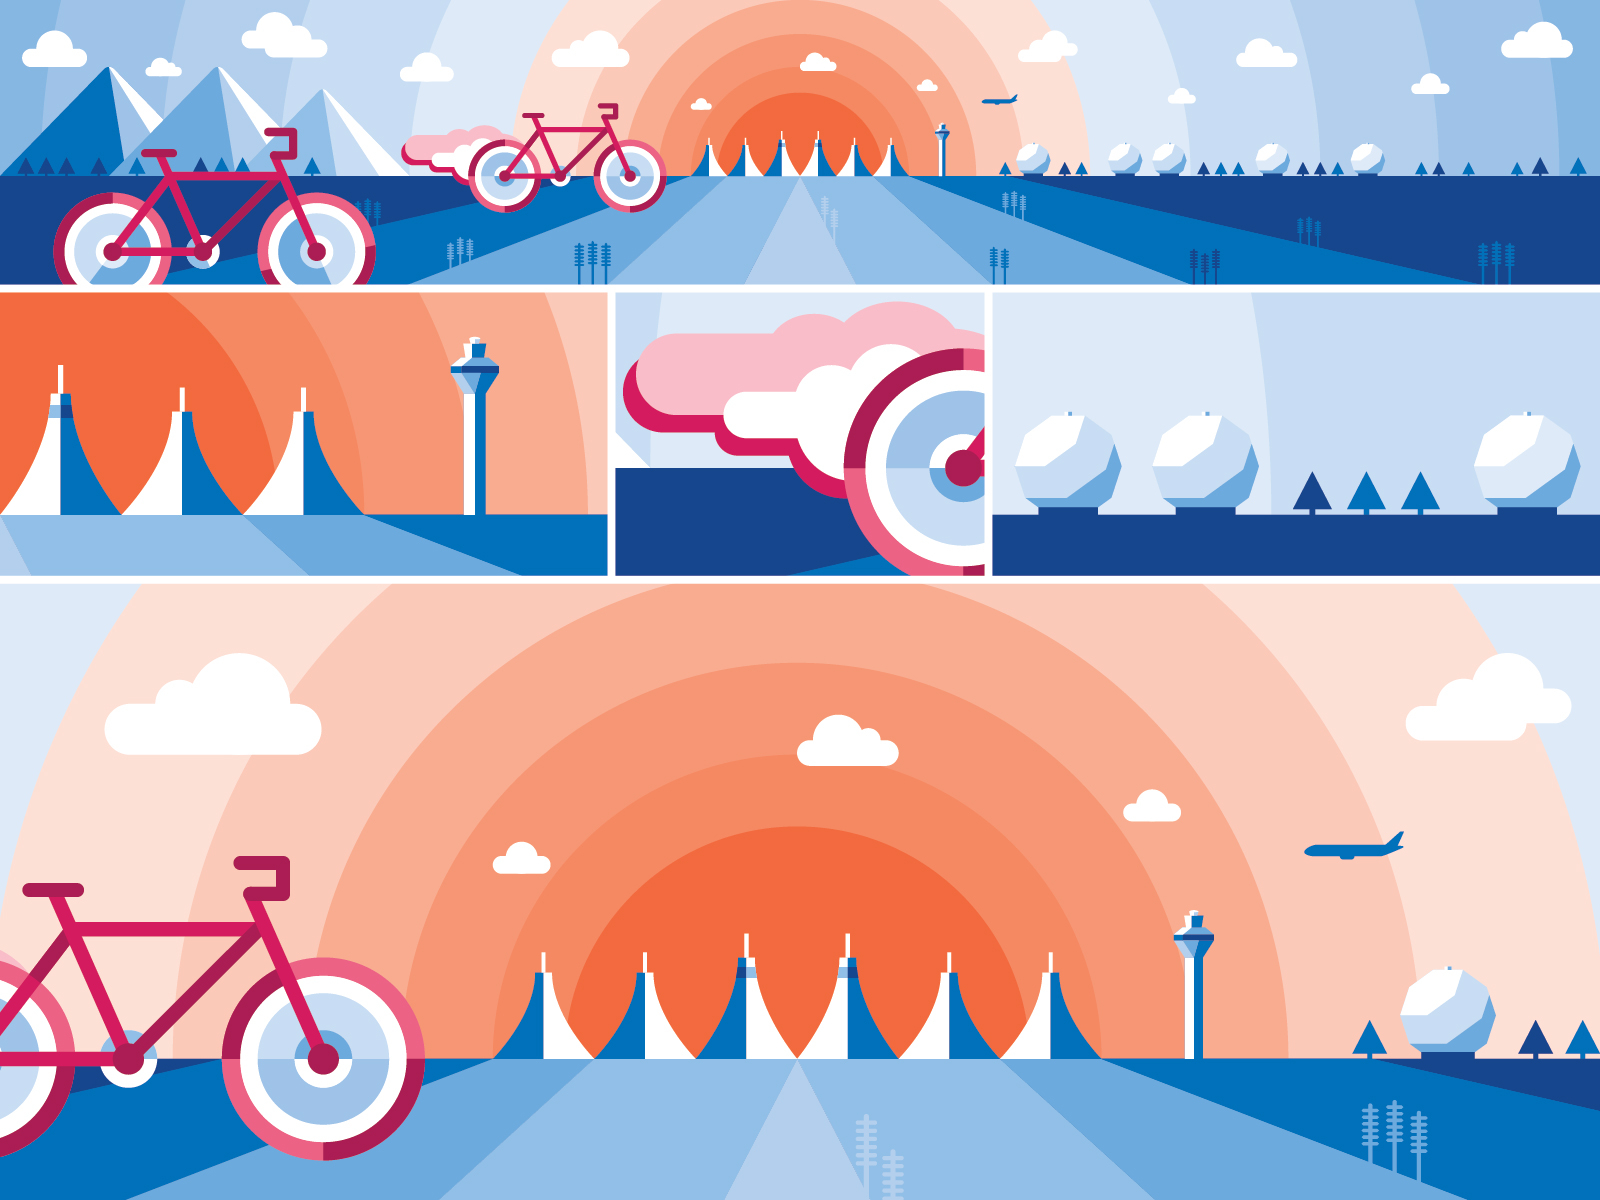 Elevate at Peña Station Mural airport bicycle bicycle shop bicycles bicycling clouds colorado denver denver international airport design dia graphic design illustration landscape mountains mural mural art mural design vector wall mural